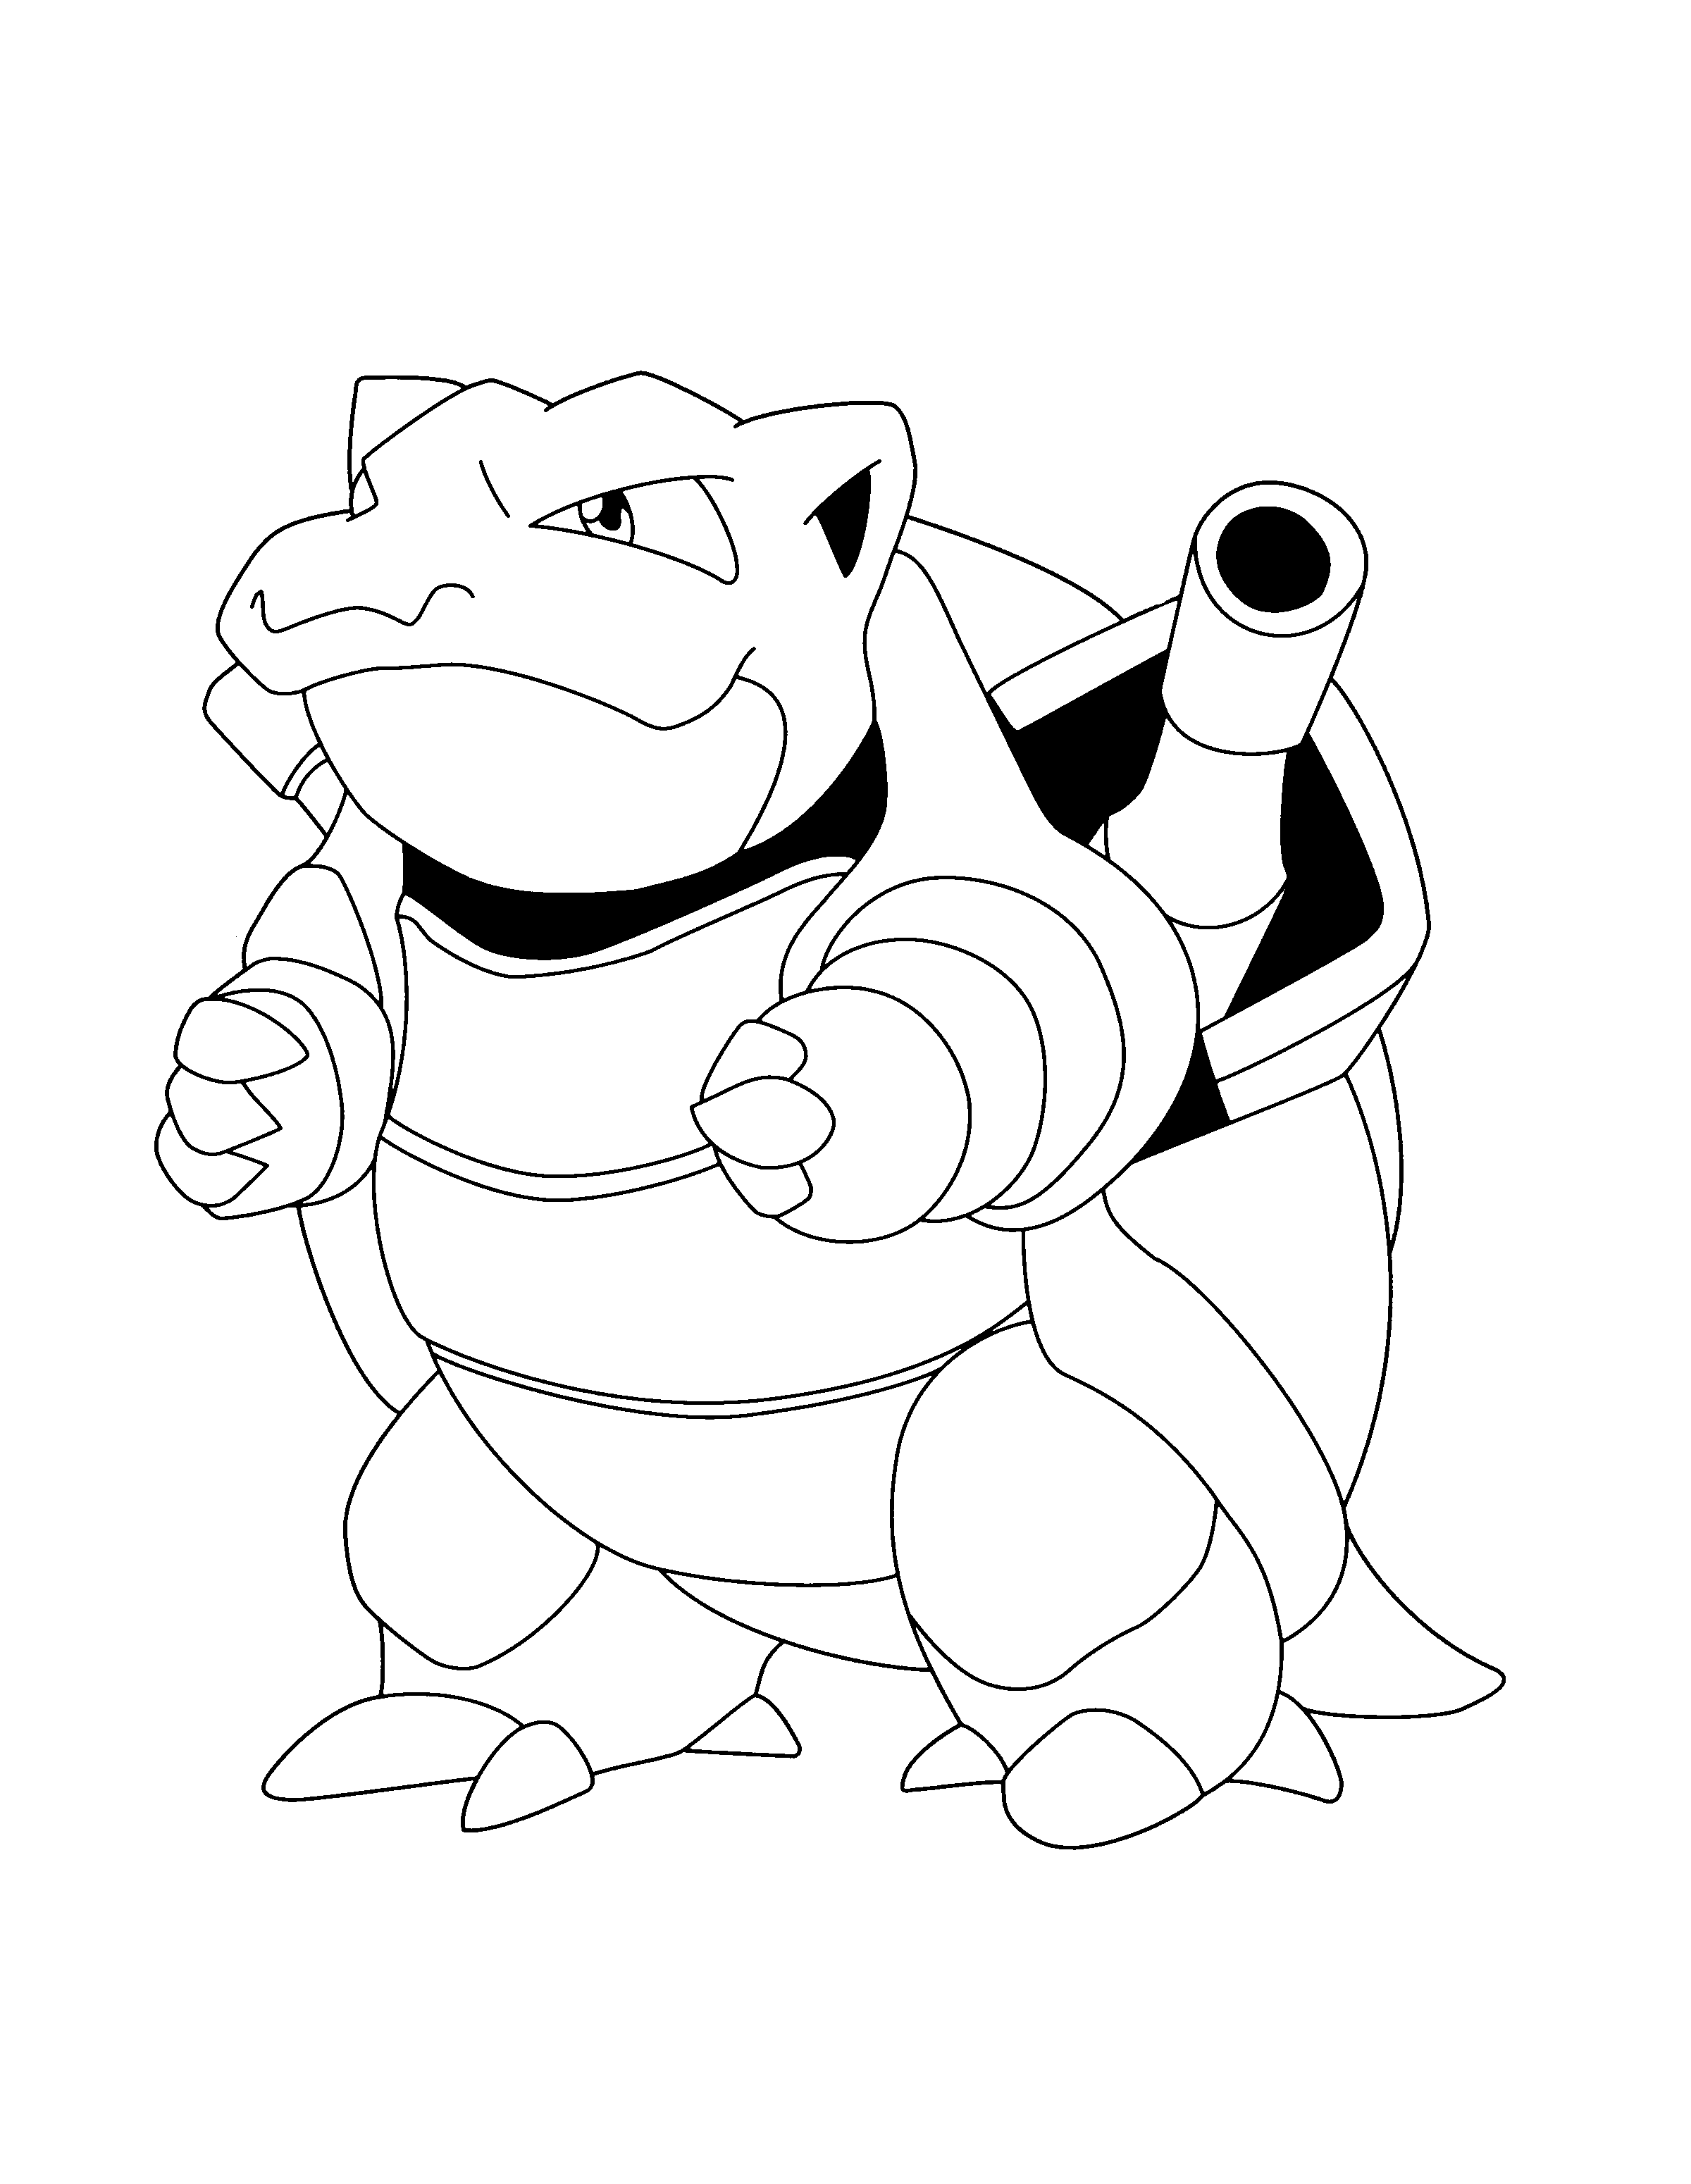 animated-coloring-pages-pokemon-image-0152